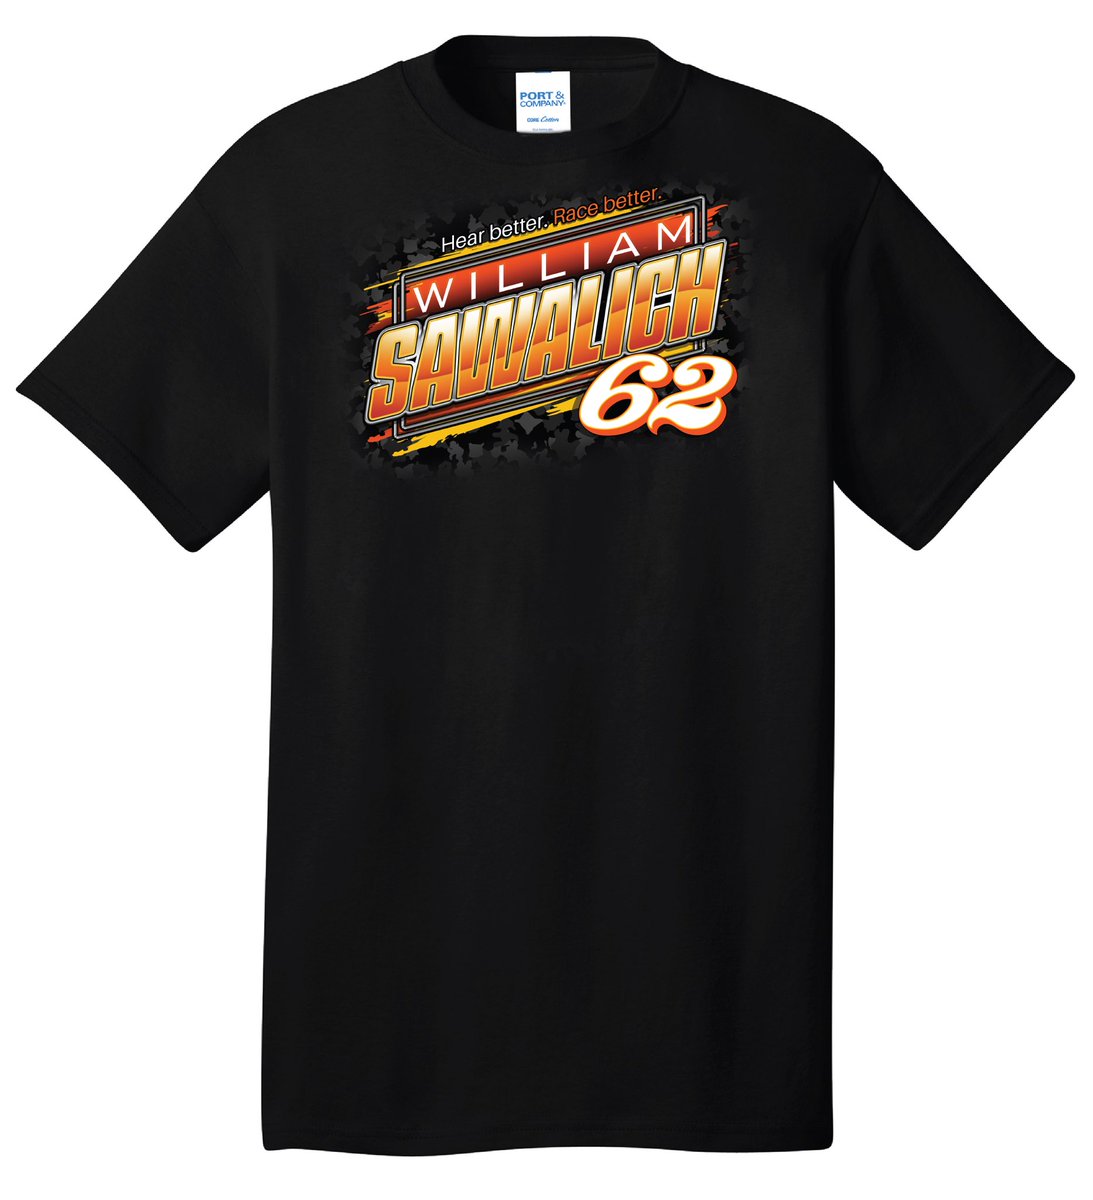 New late model shirts are available now! Visit happyseshop.com to get yours before they sell out.